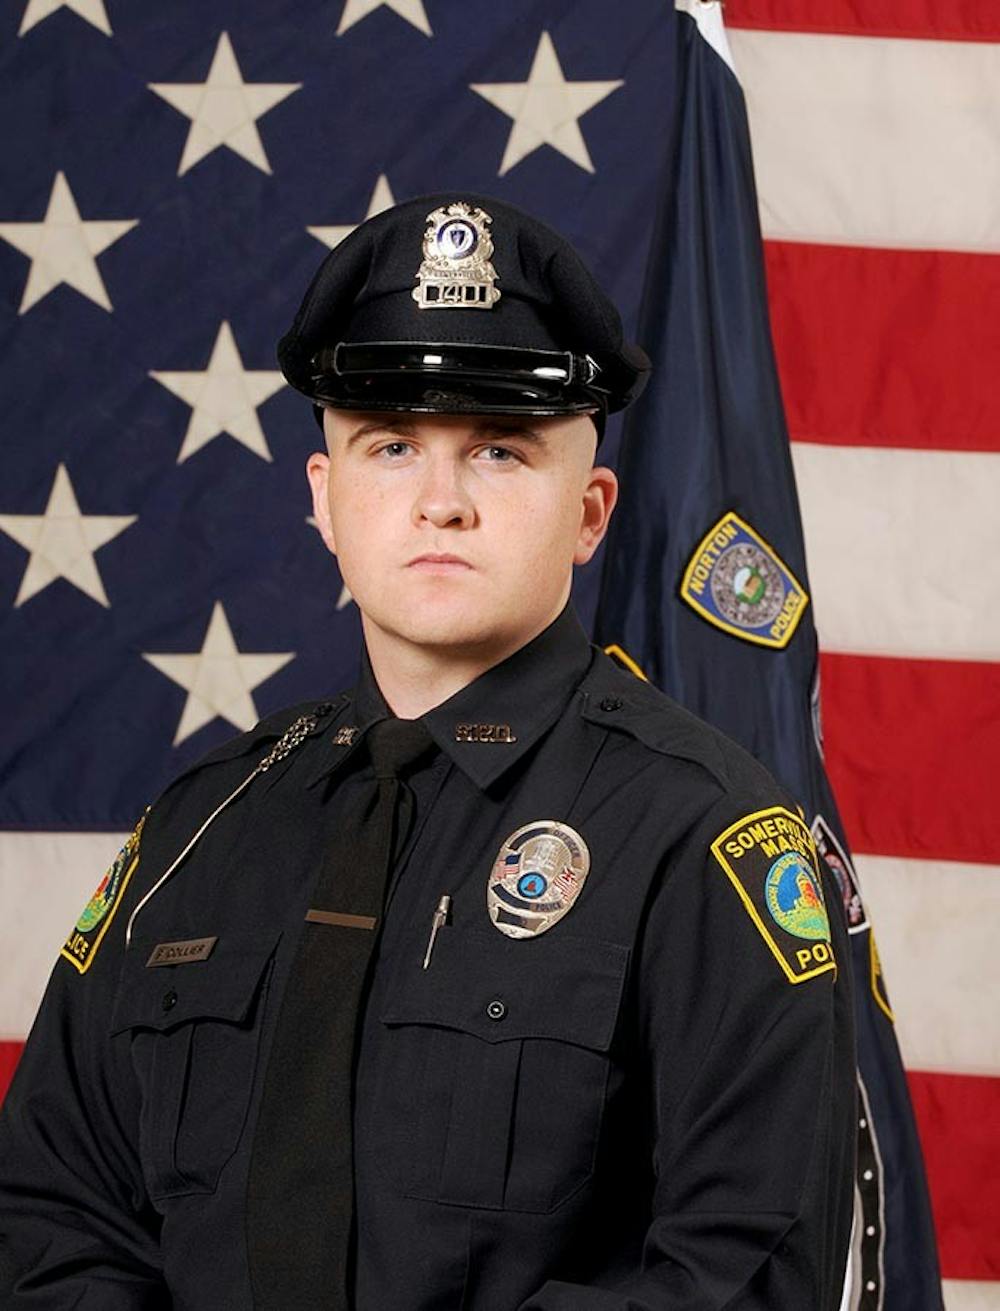 Cadet Sean Collier wears the Somerville Police Department uniform for his 25th MPOC Academy Police graduation portrait. Although employed by MIT, Collier was sponsored by Somerville PD while at the academy. Photo taken September 27, 2010. (Jim Mahoney/Boston Herald/MCT)